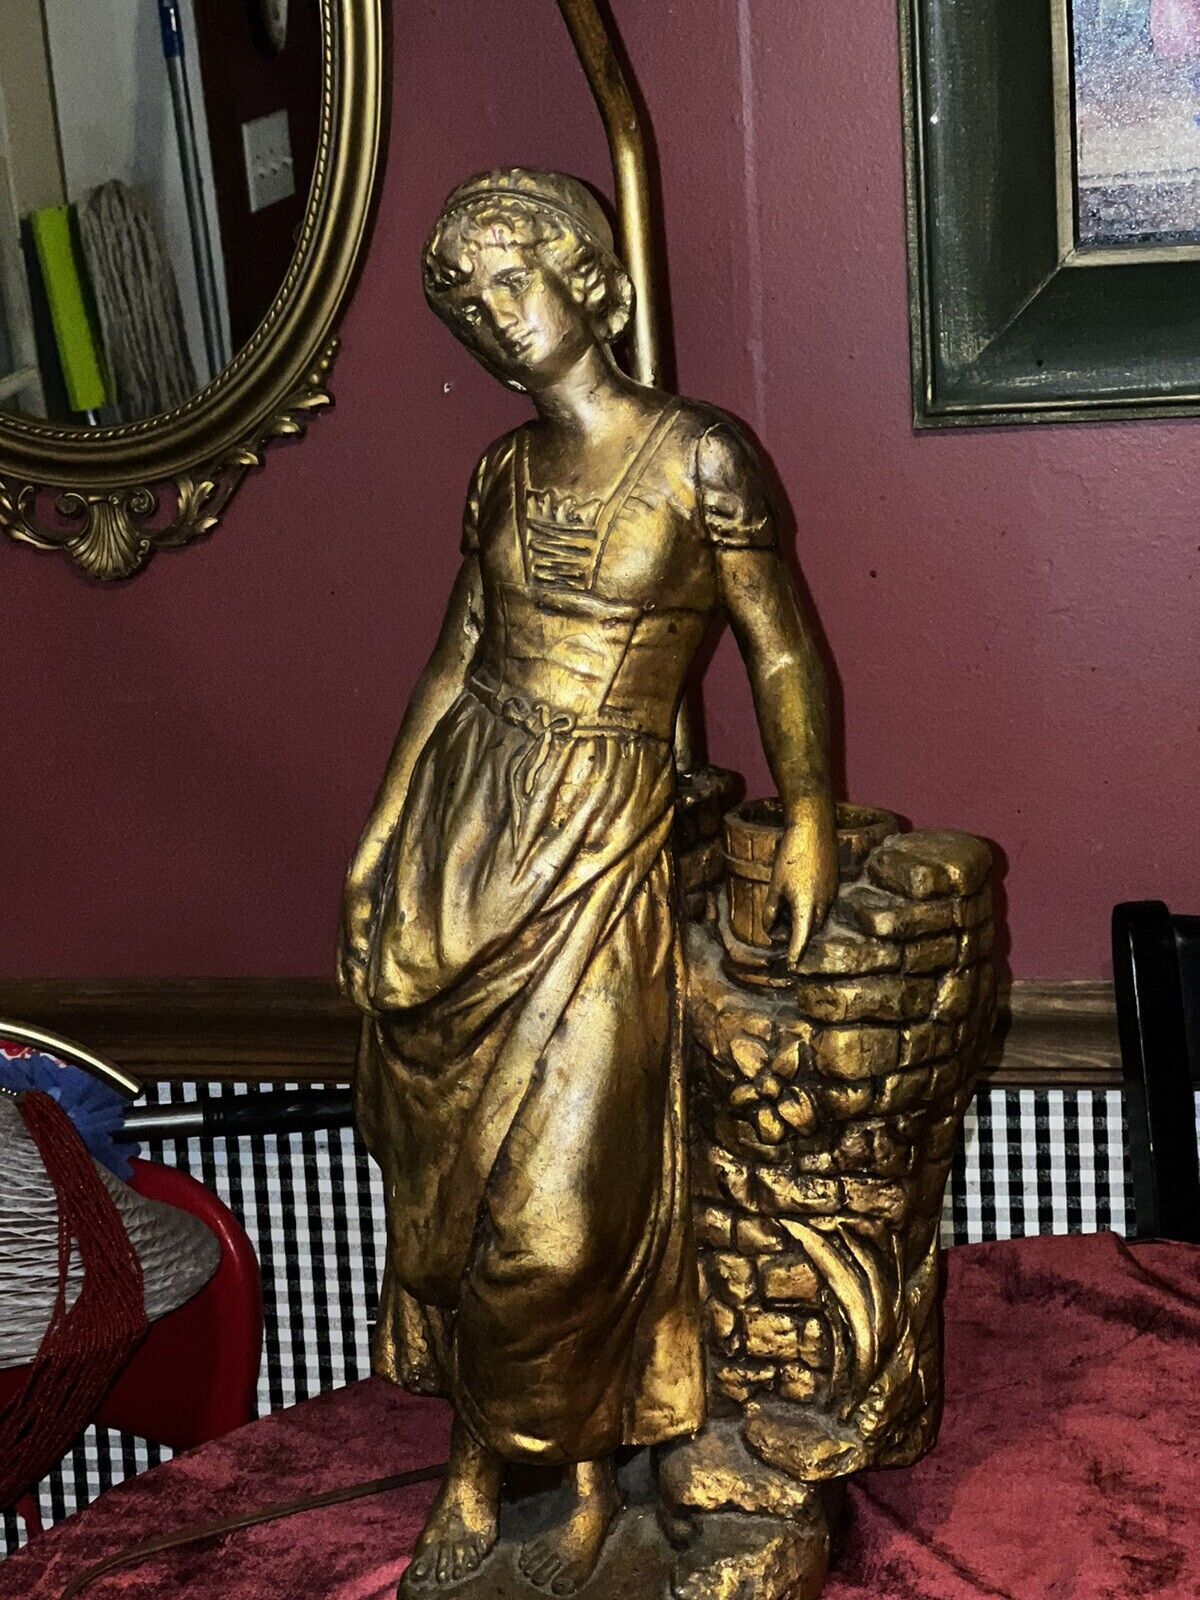 OLD FRENCH LADY STATUE LAMP PLASTER GILT “THE HOUSE OF  ALBARRAN” RARE